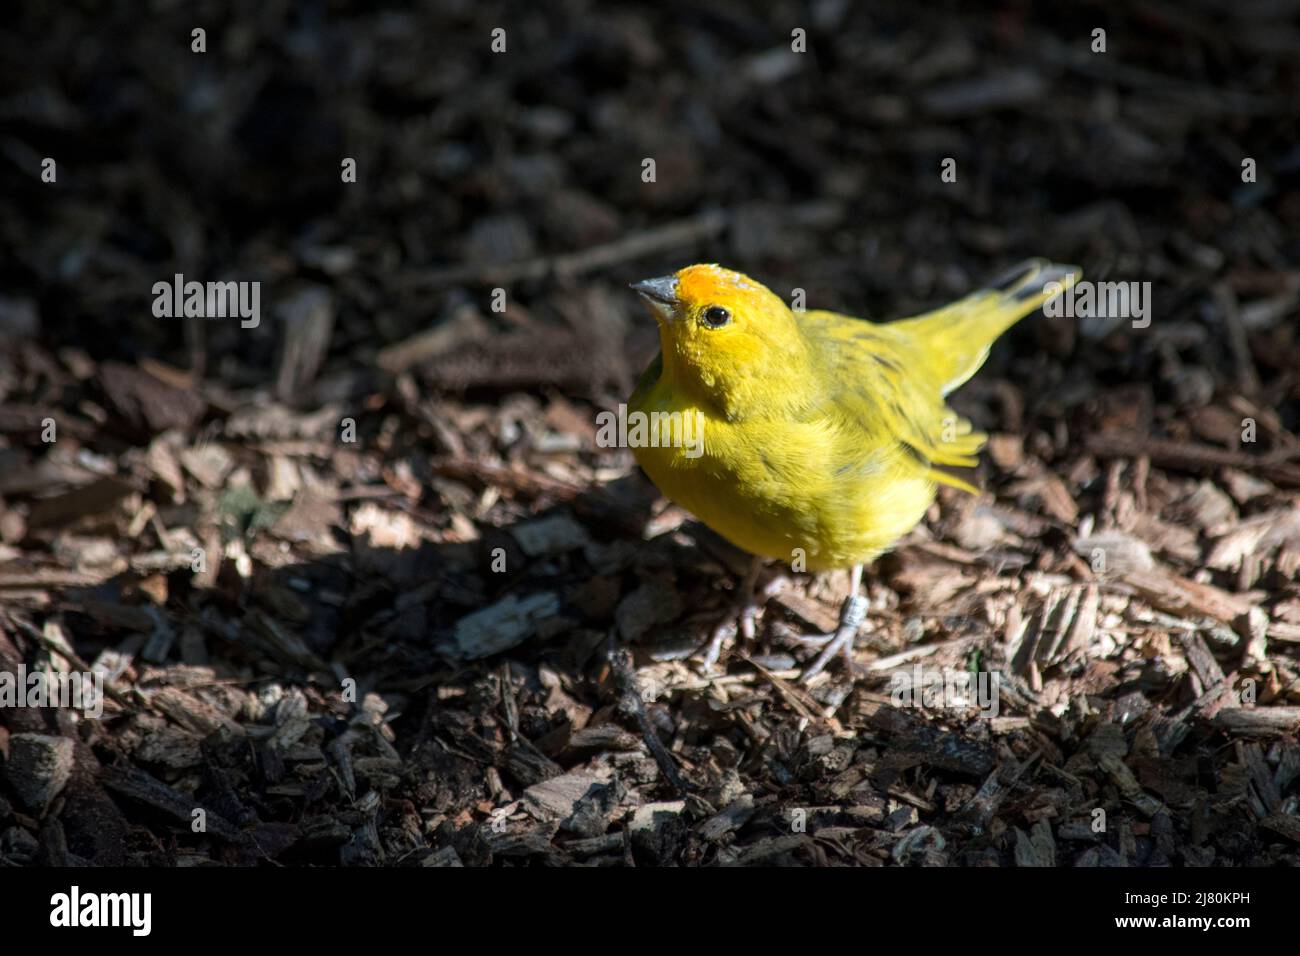 closeup of a yellow canary on the ground Stock Photo